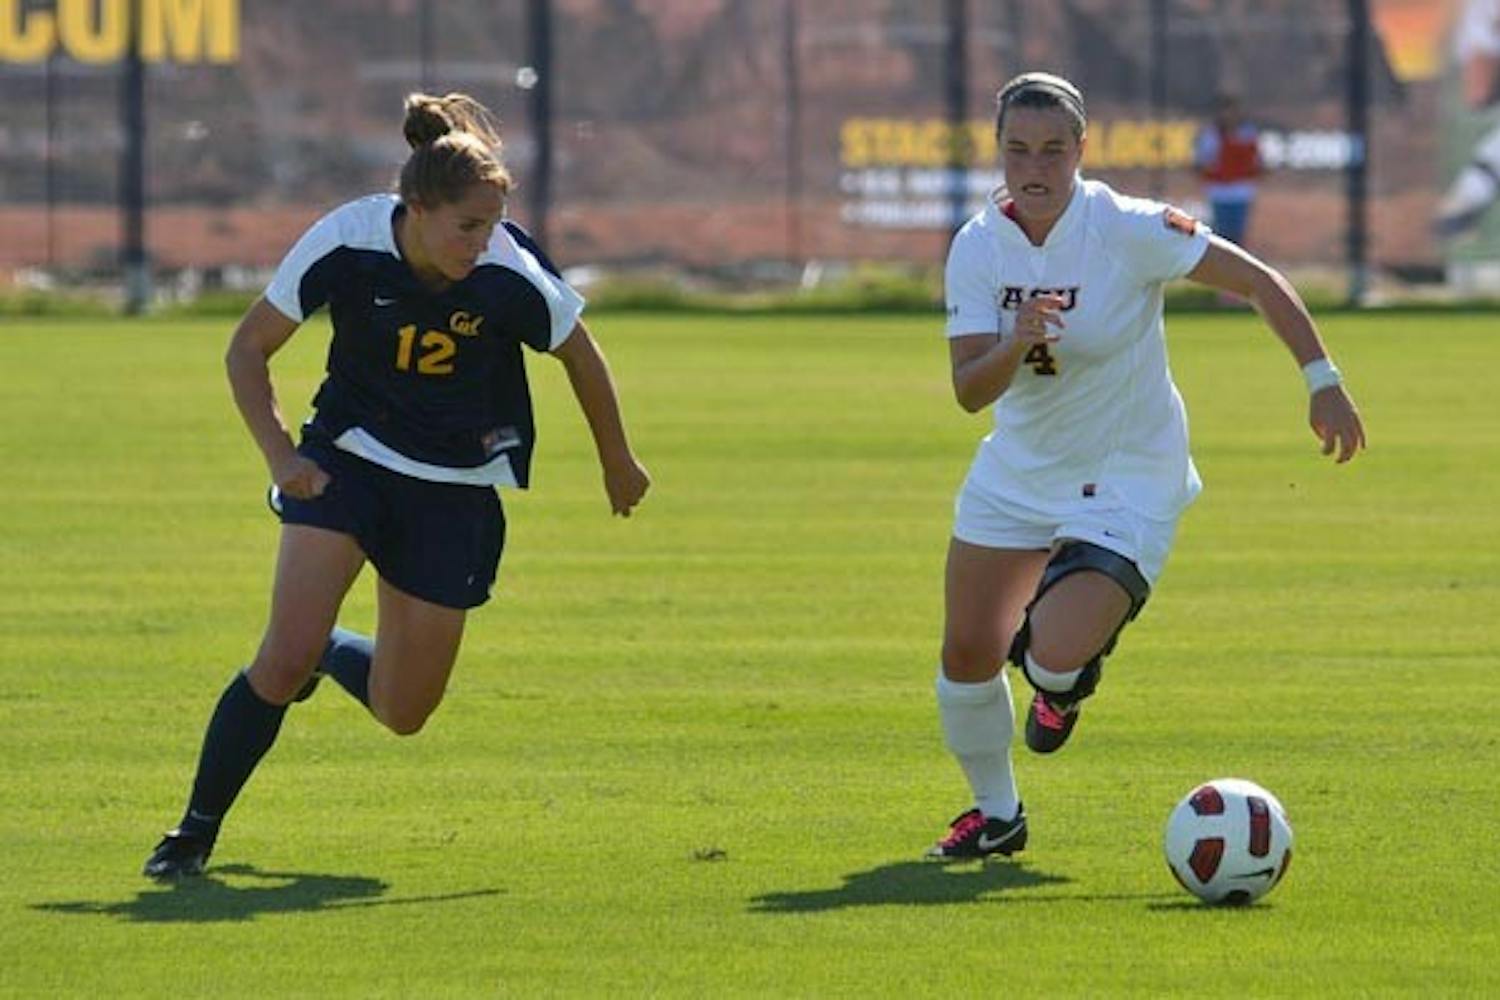 HOT PURSUIT: Senior midfielder/forward Jill Shoquist dribbles away from Cal sophomore forward Samantha Walker. The ASU women's soccer team is hoping to win at least two of their final four games to qualify for the NCAA tournament. (Photo by Aaron Lavinsky)